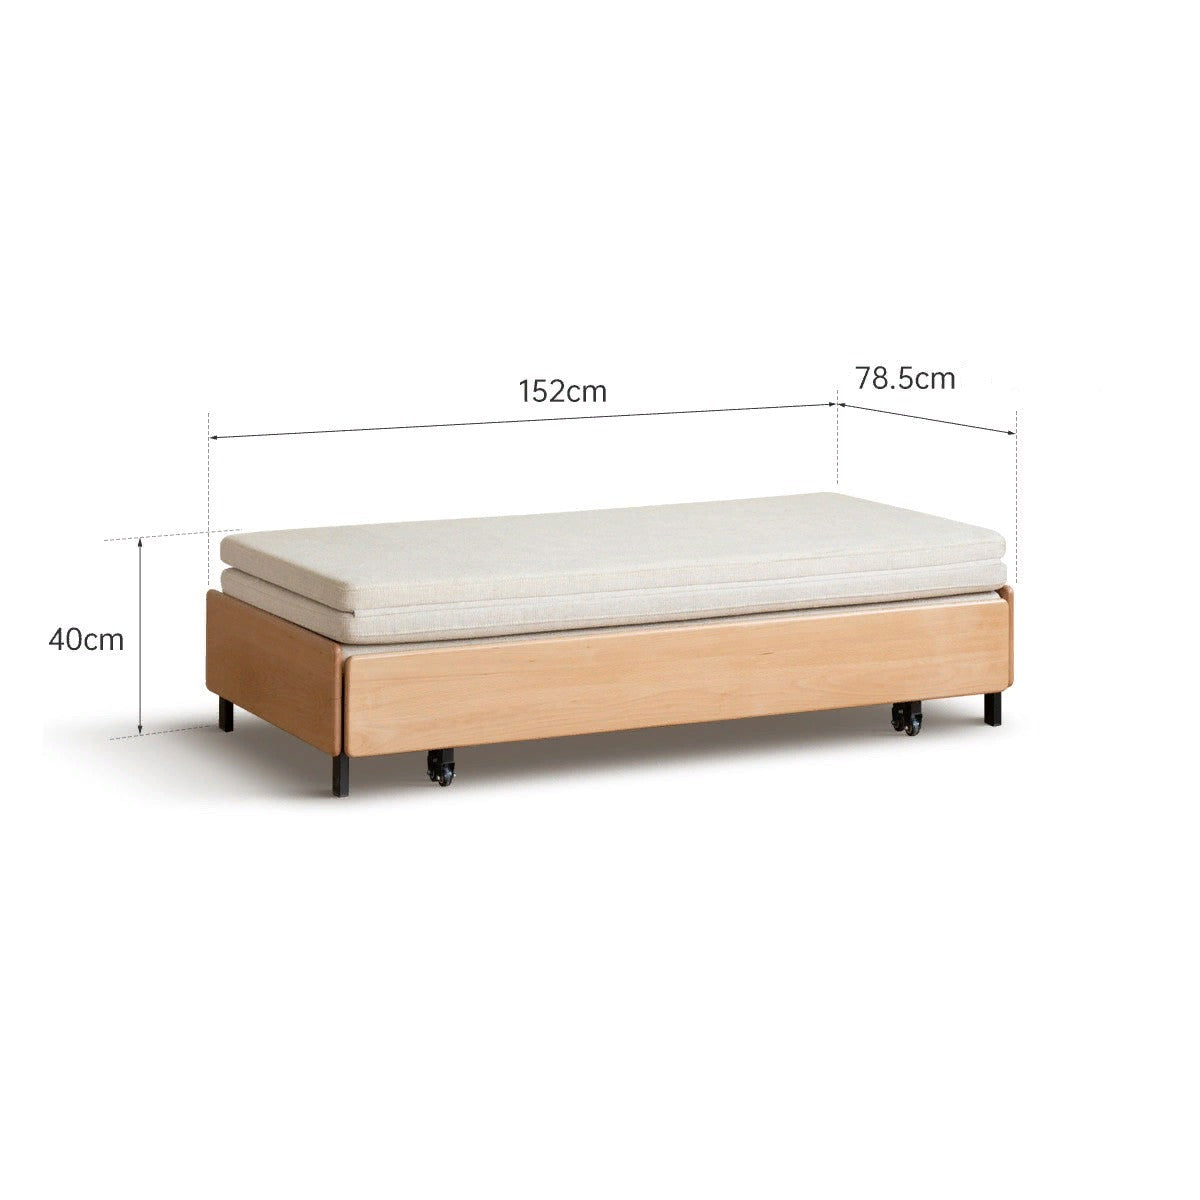 Oak solid wood sofa bed folding sit-sleeping pull-out bed+